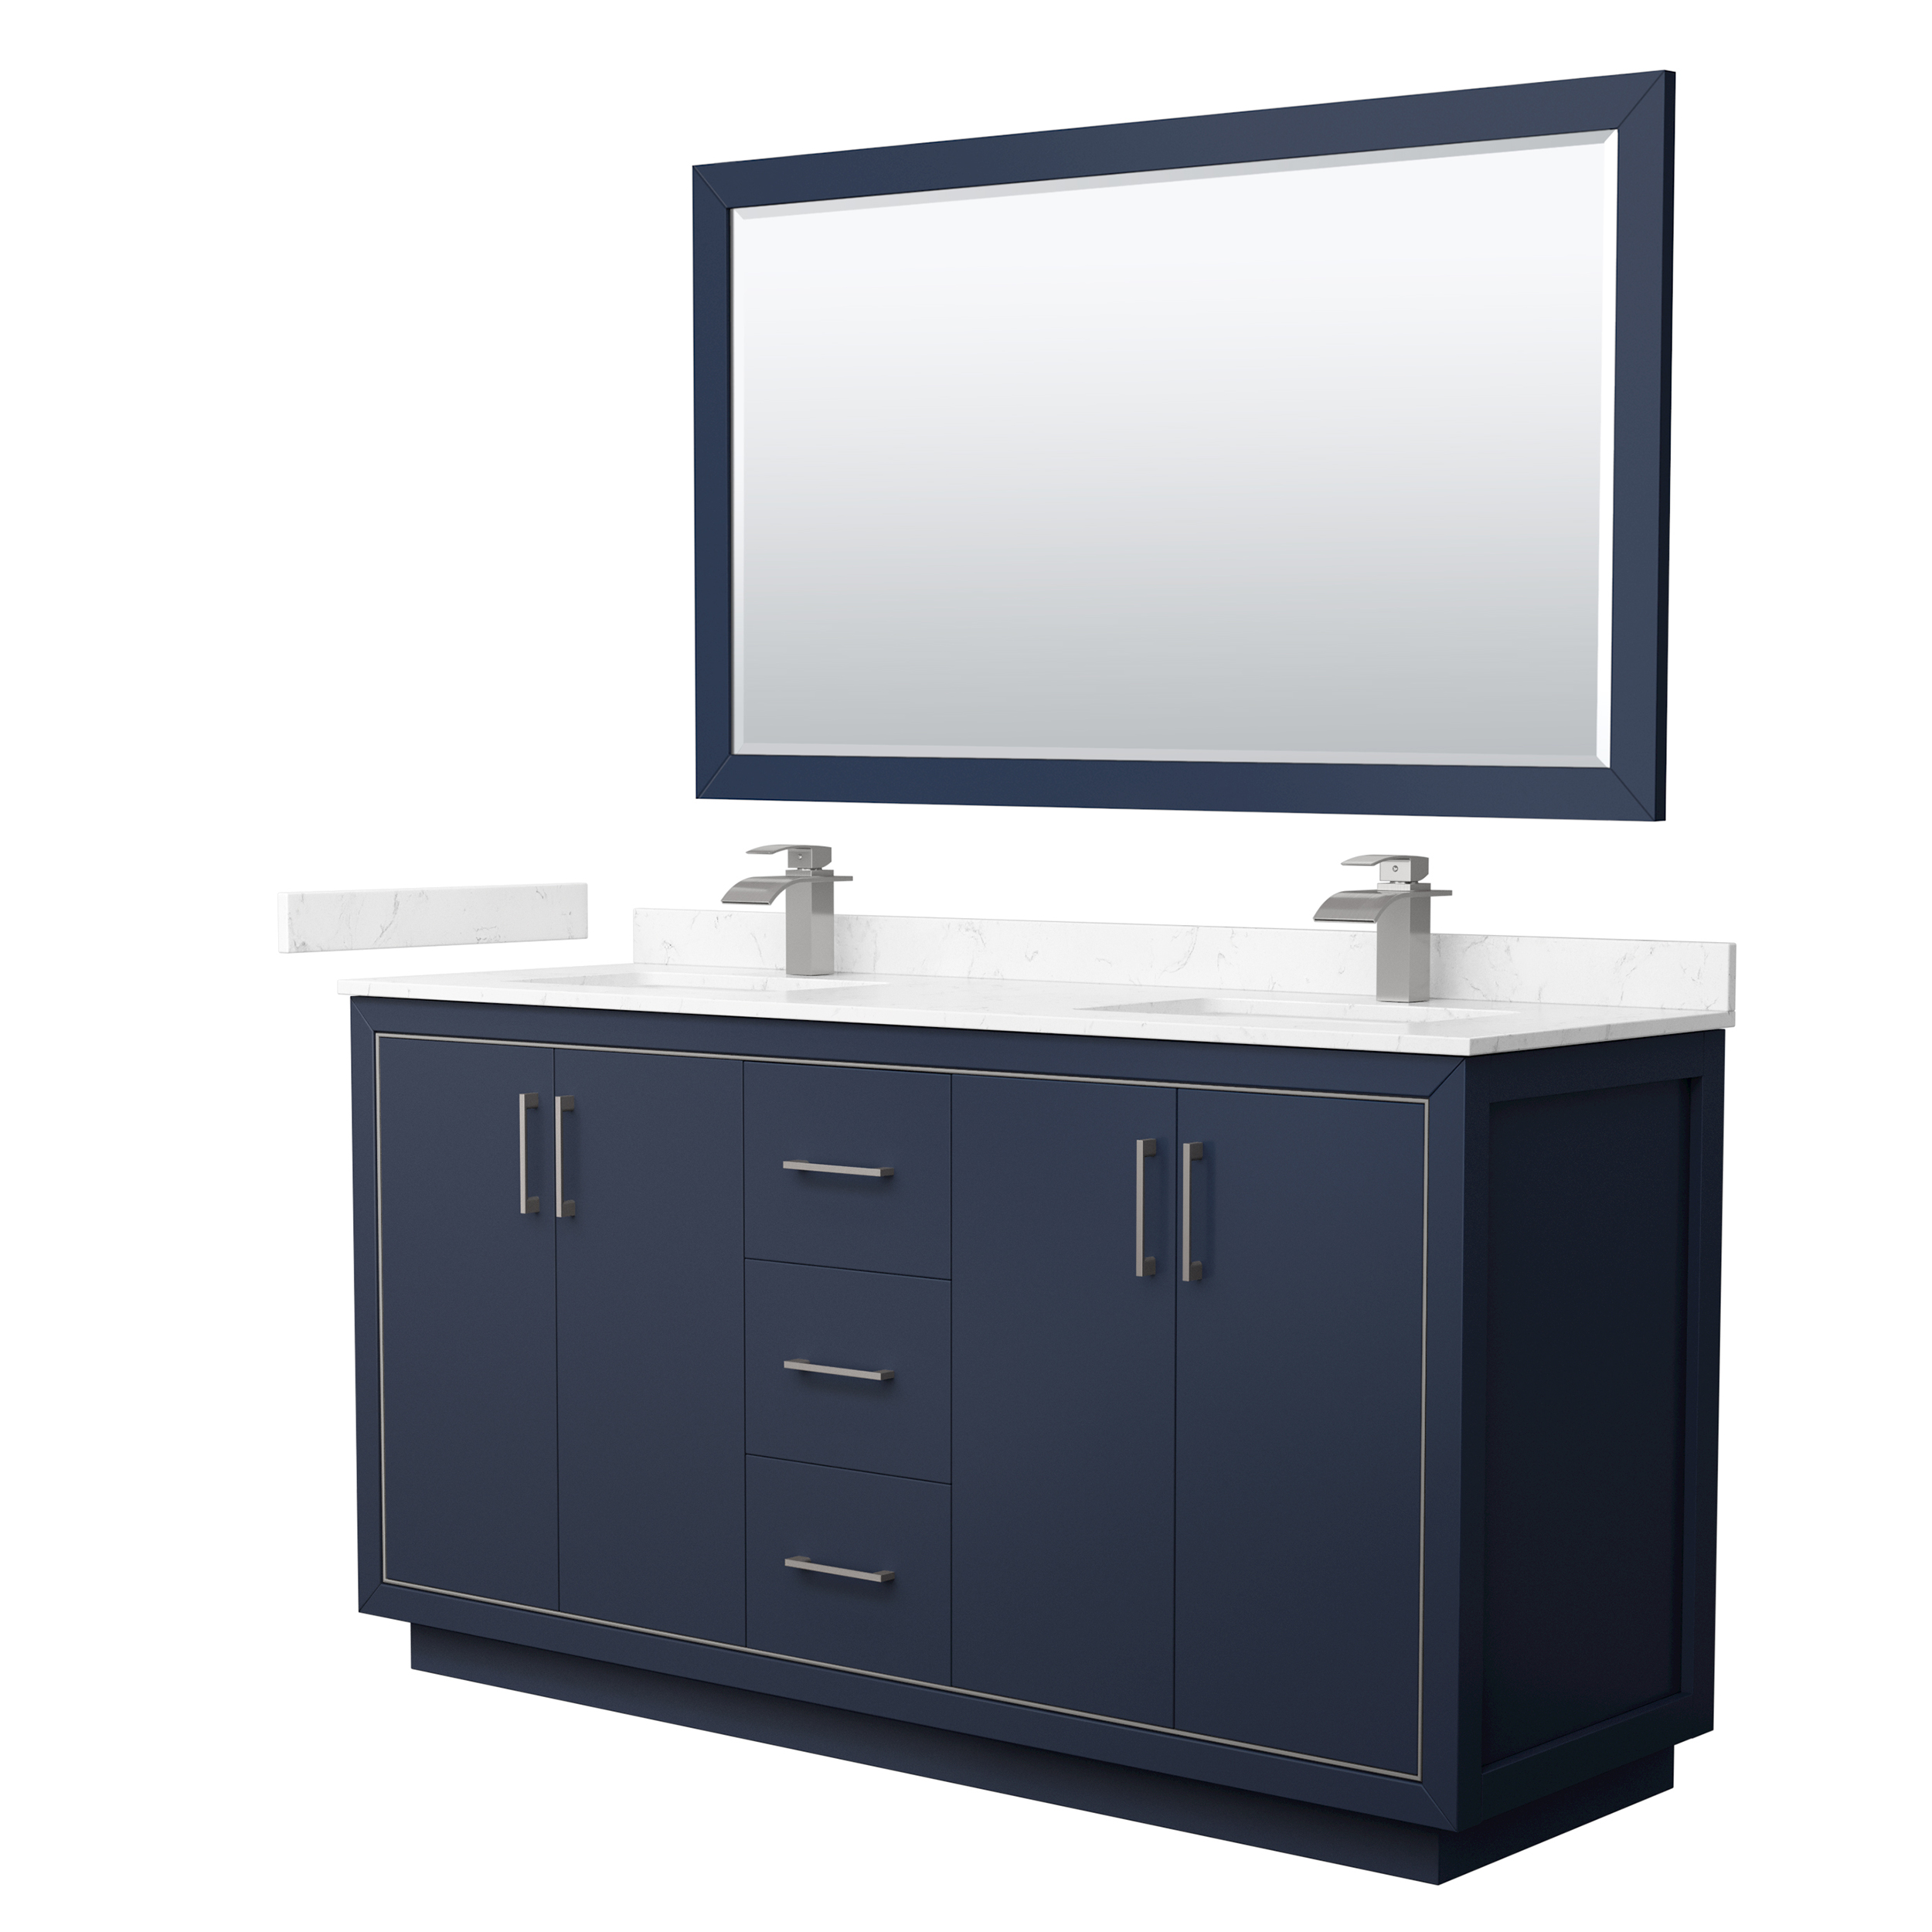 Icon 66" Double Vanity with optional Cultured Marble Counter - Dark Blue WC-1111-66-DBL-VAN-BLU--COPY